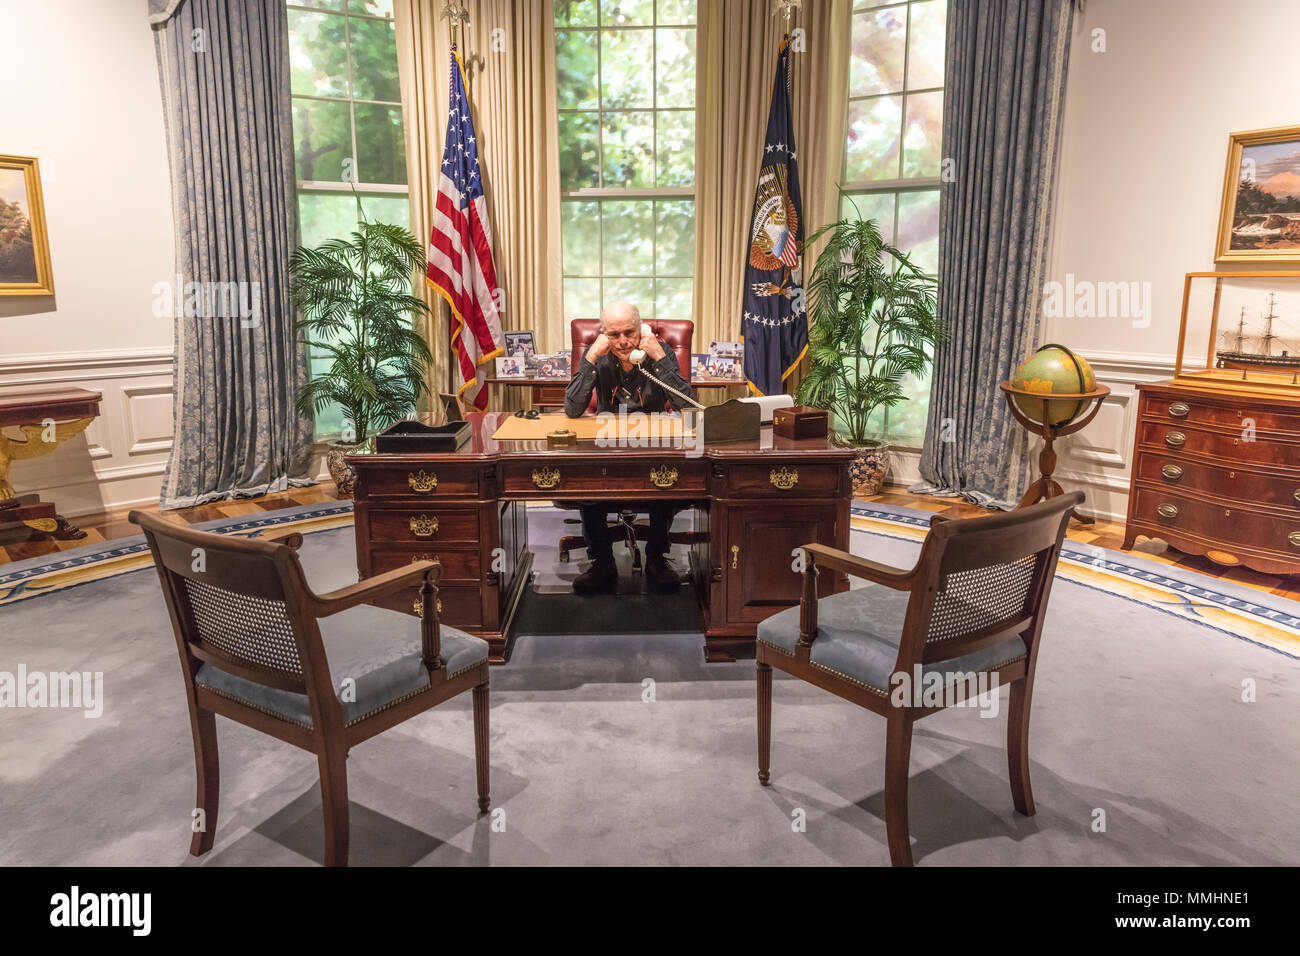 FEBRUARY 28, 2018 - COLLEGE STATION TEXAS - George H.W. Bush Presidential Library and Museum shows Oval Office shows photographer Joe Sohm sitting at Oval Office Desk Stock Photo